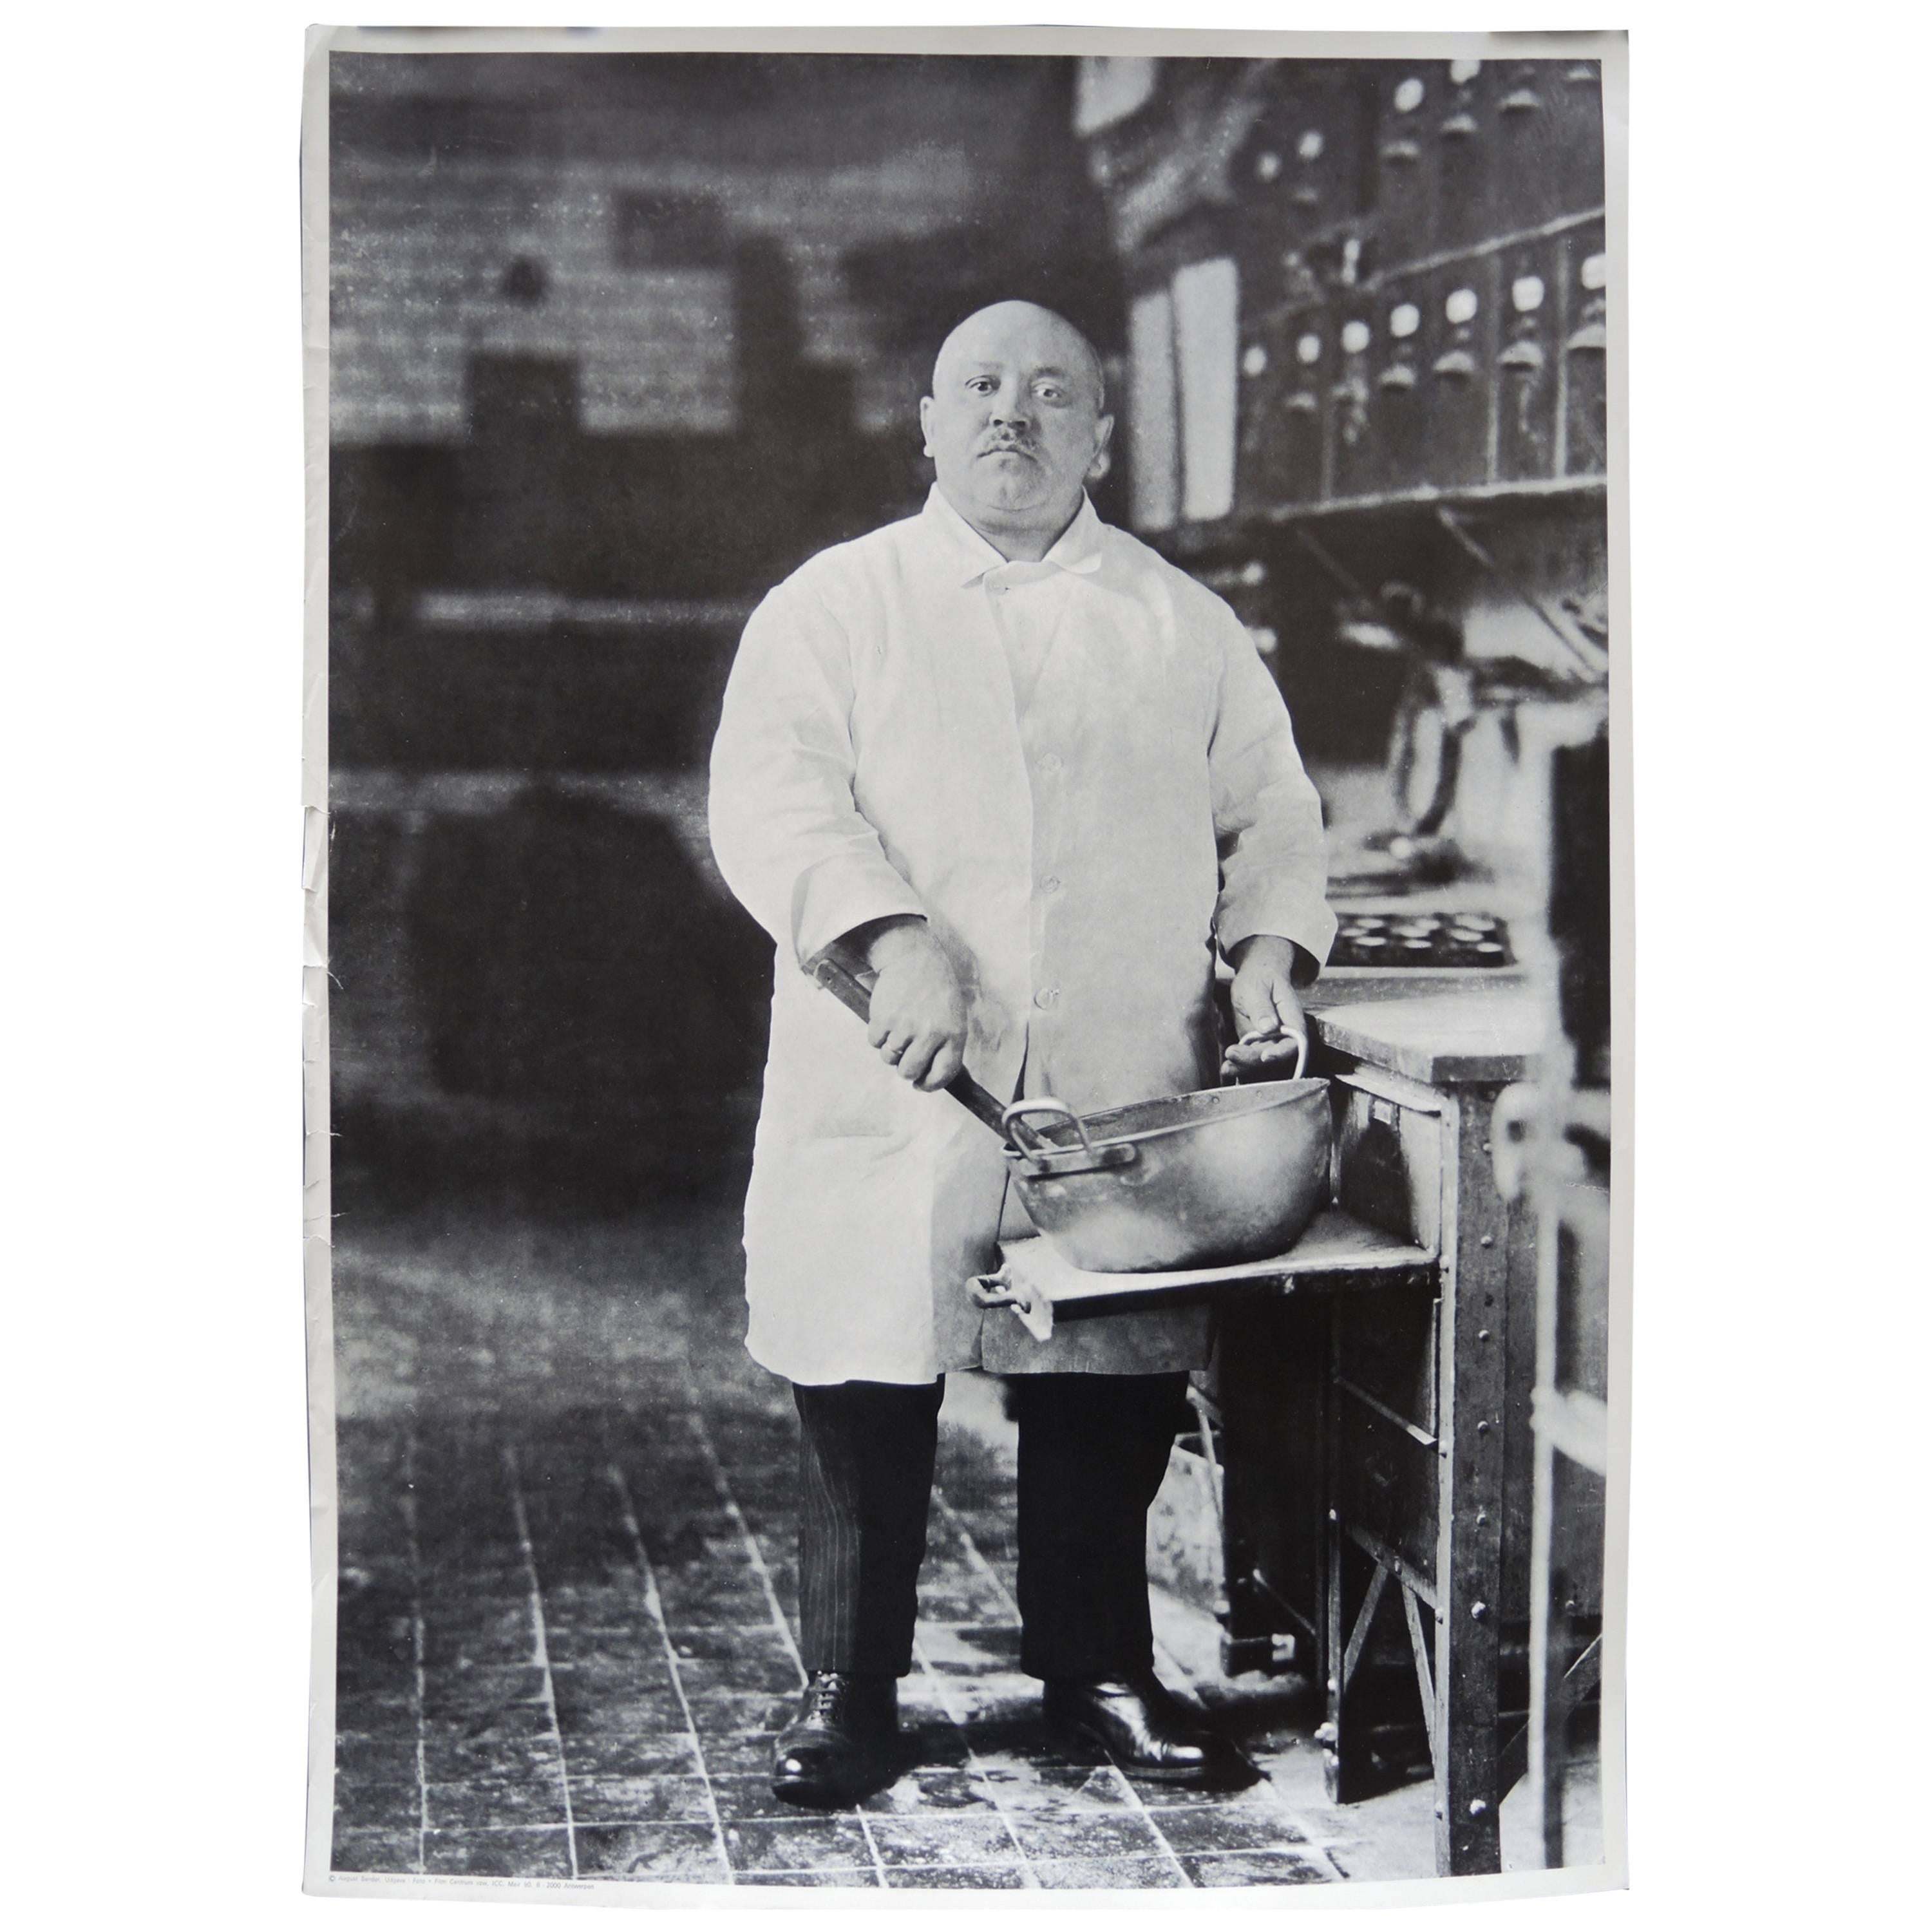 Eleven Poster Prints of the Iconic Chef Photo by August Sander, circa 1970